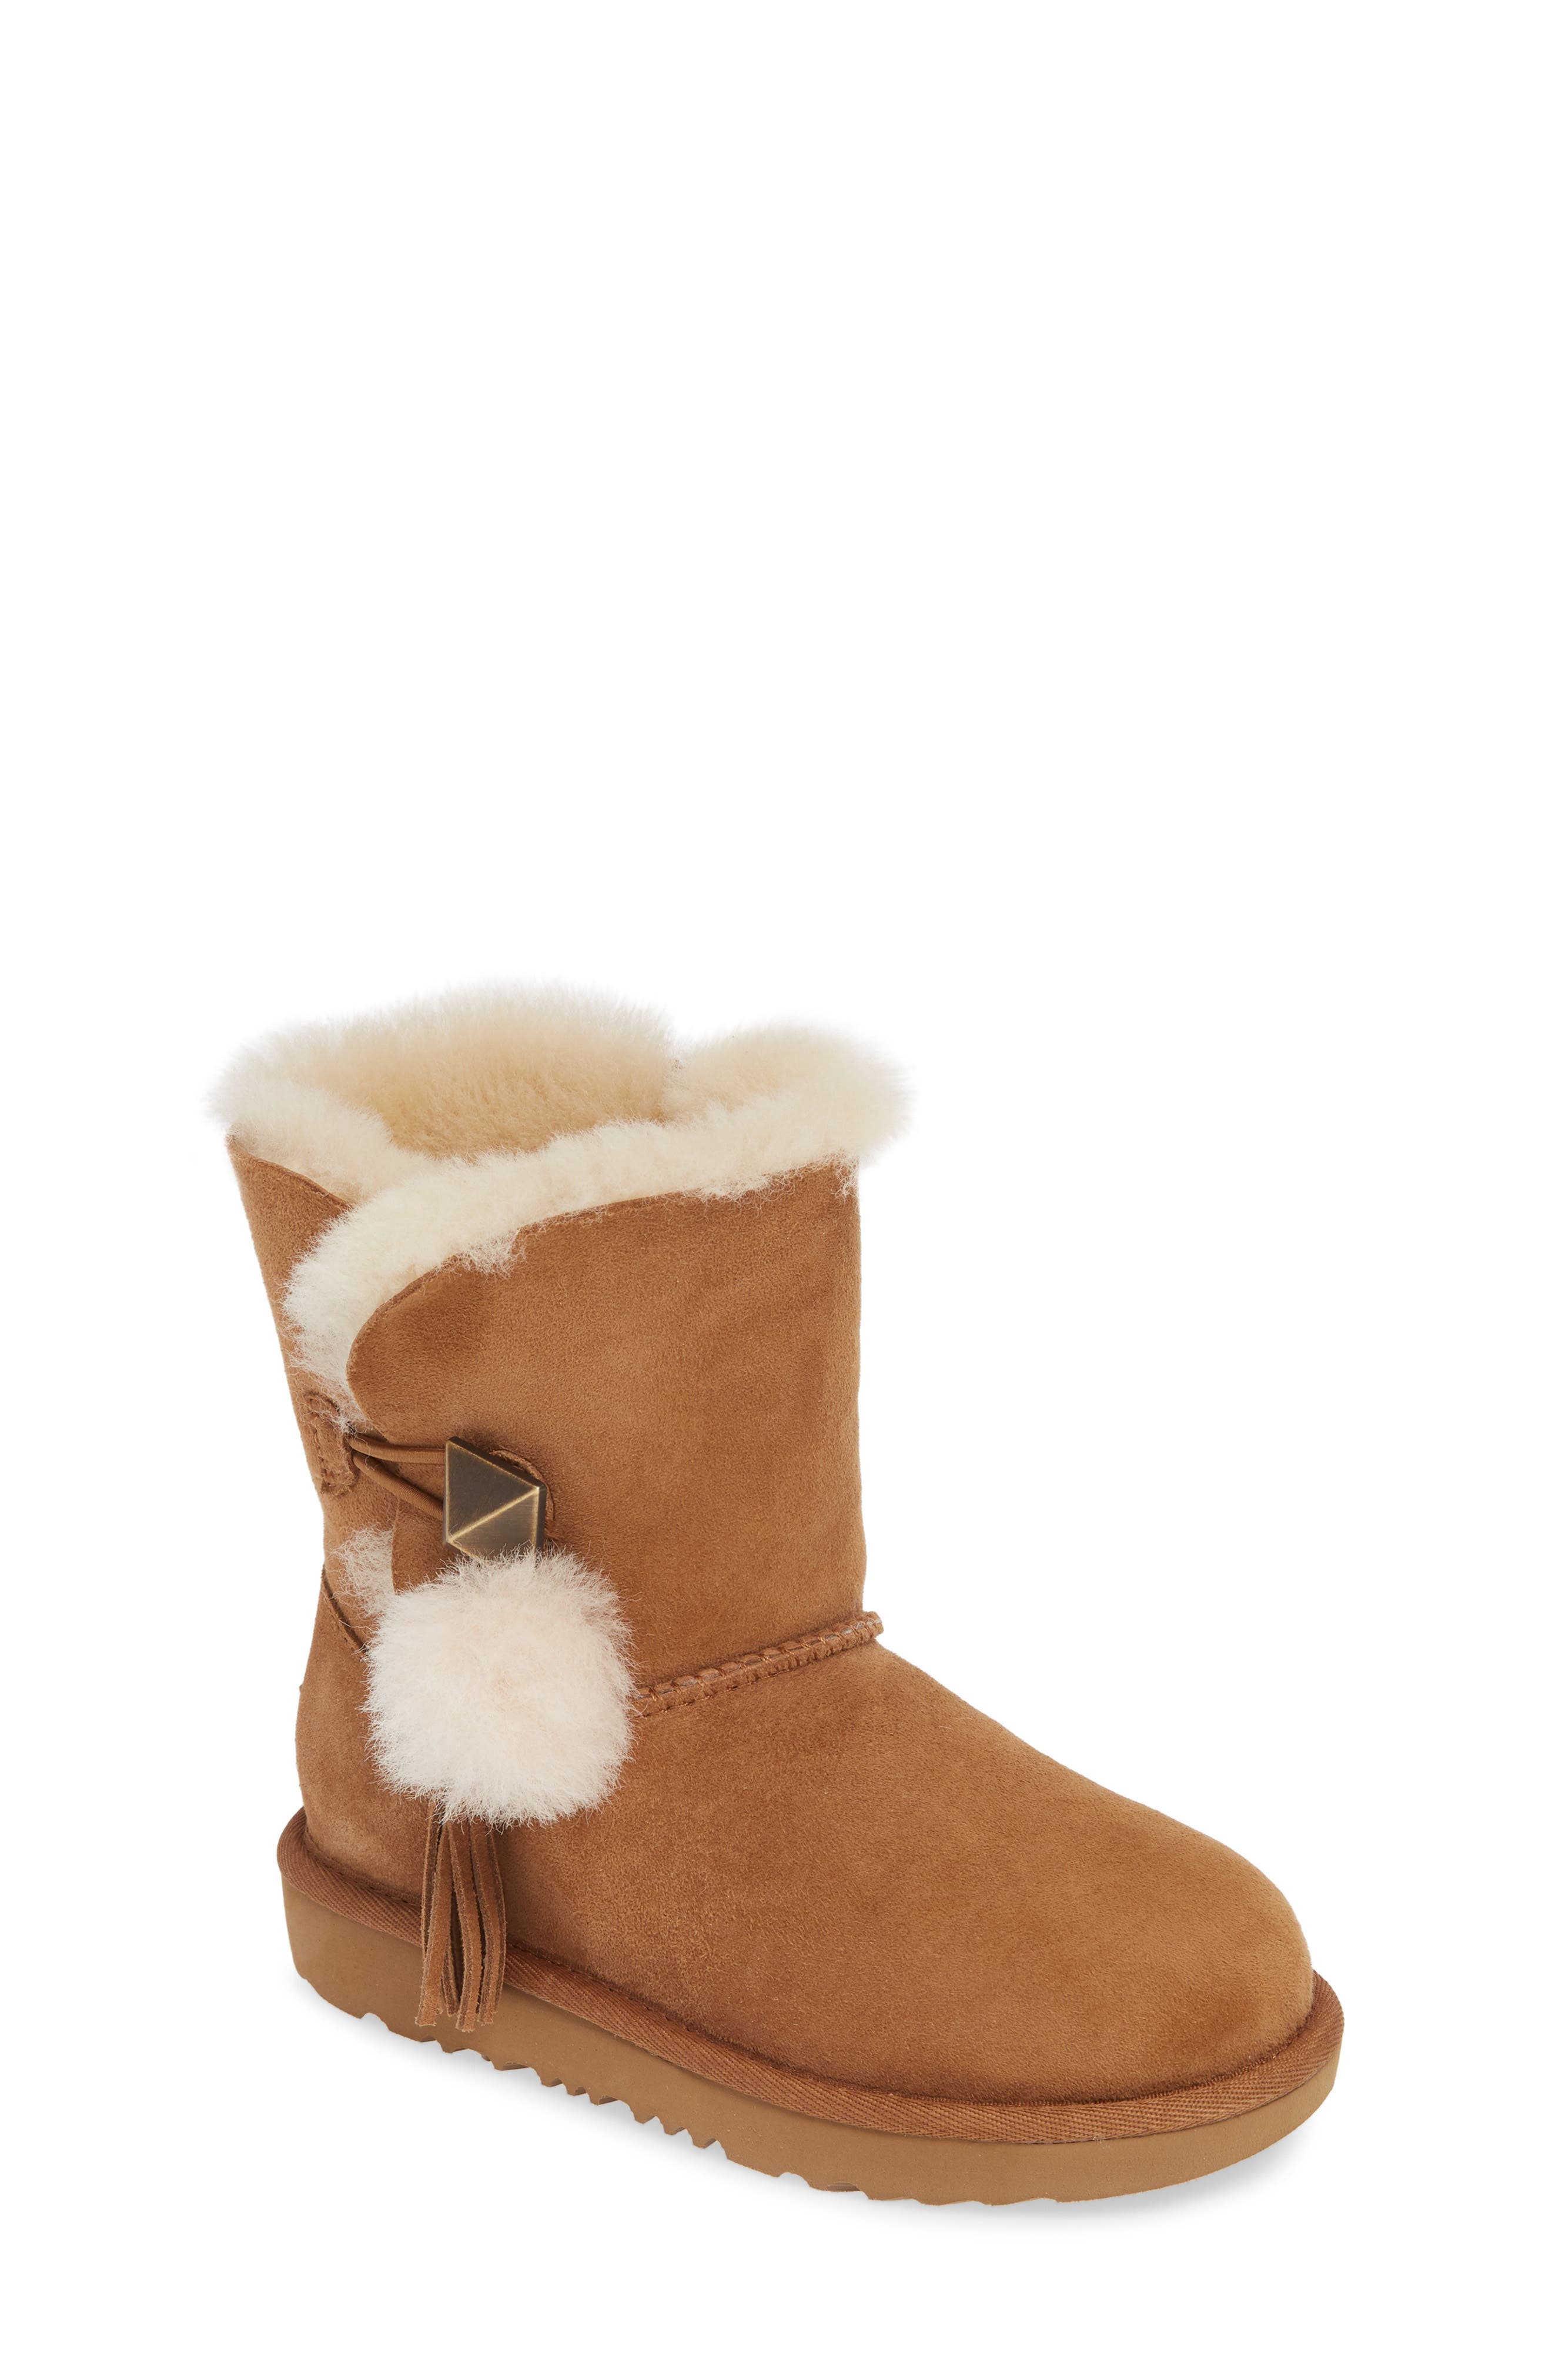 ugg boots with pom poms